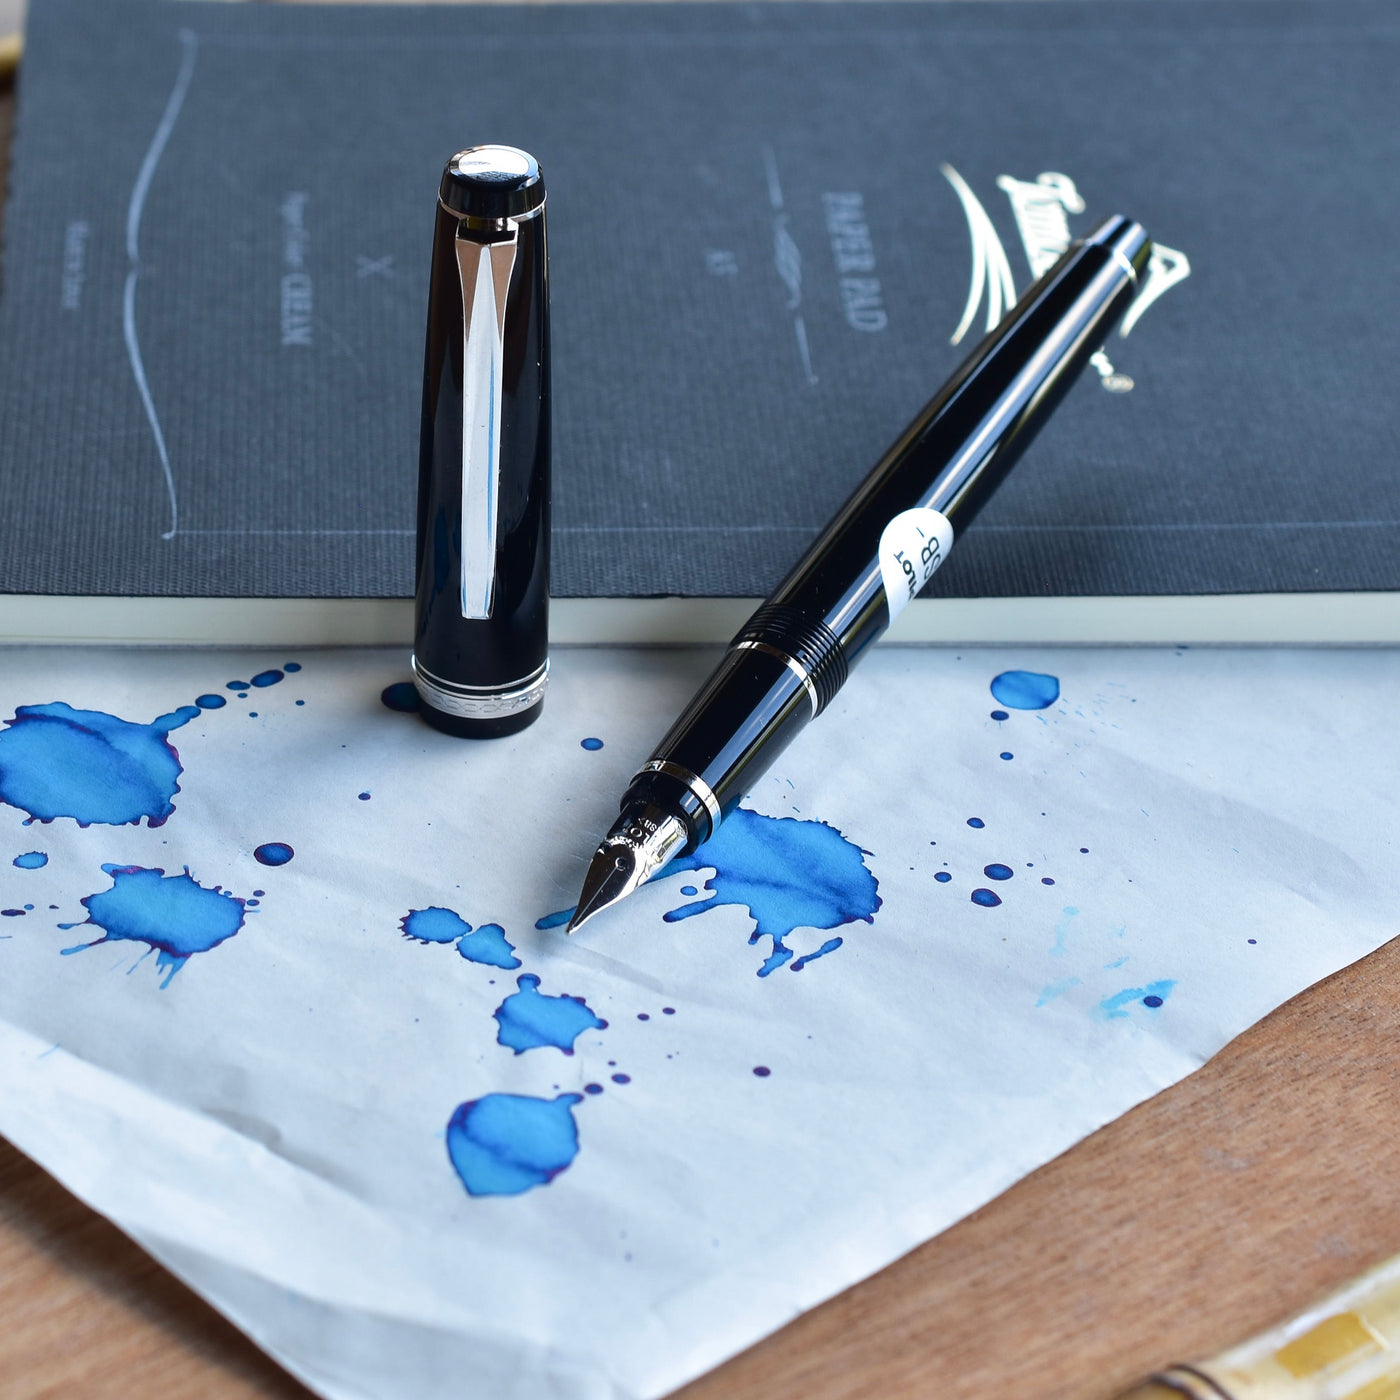 Pilot Falcon - Black body with a light material that polishes to a high gloss. 